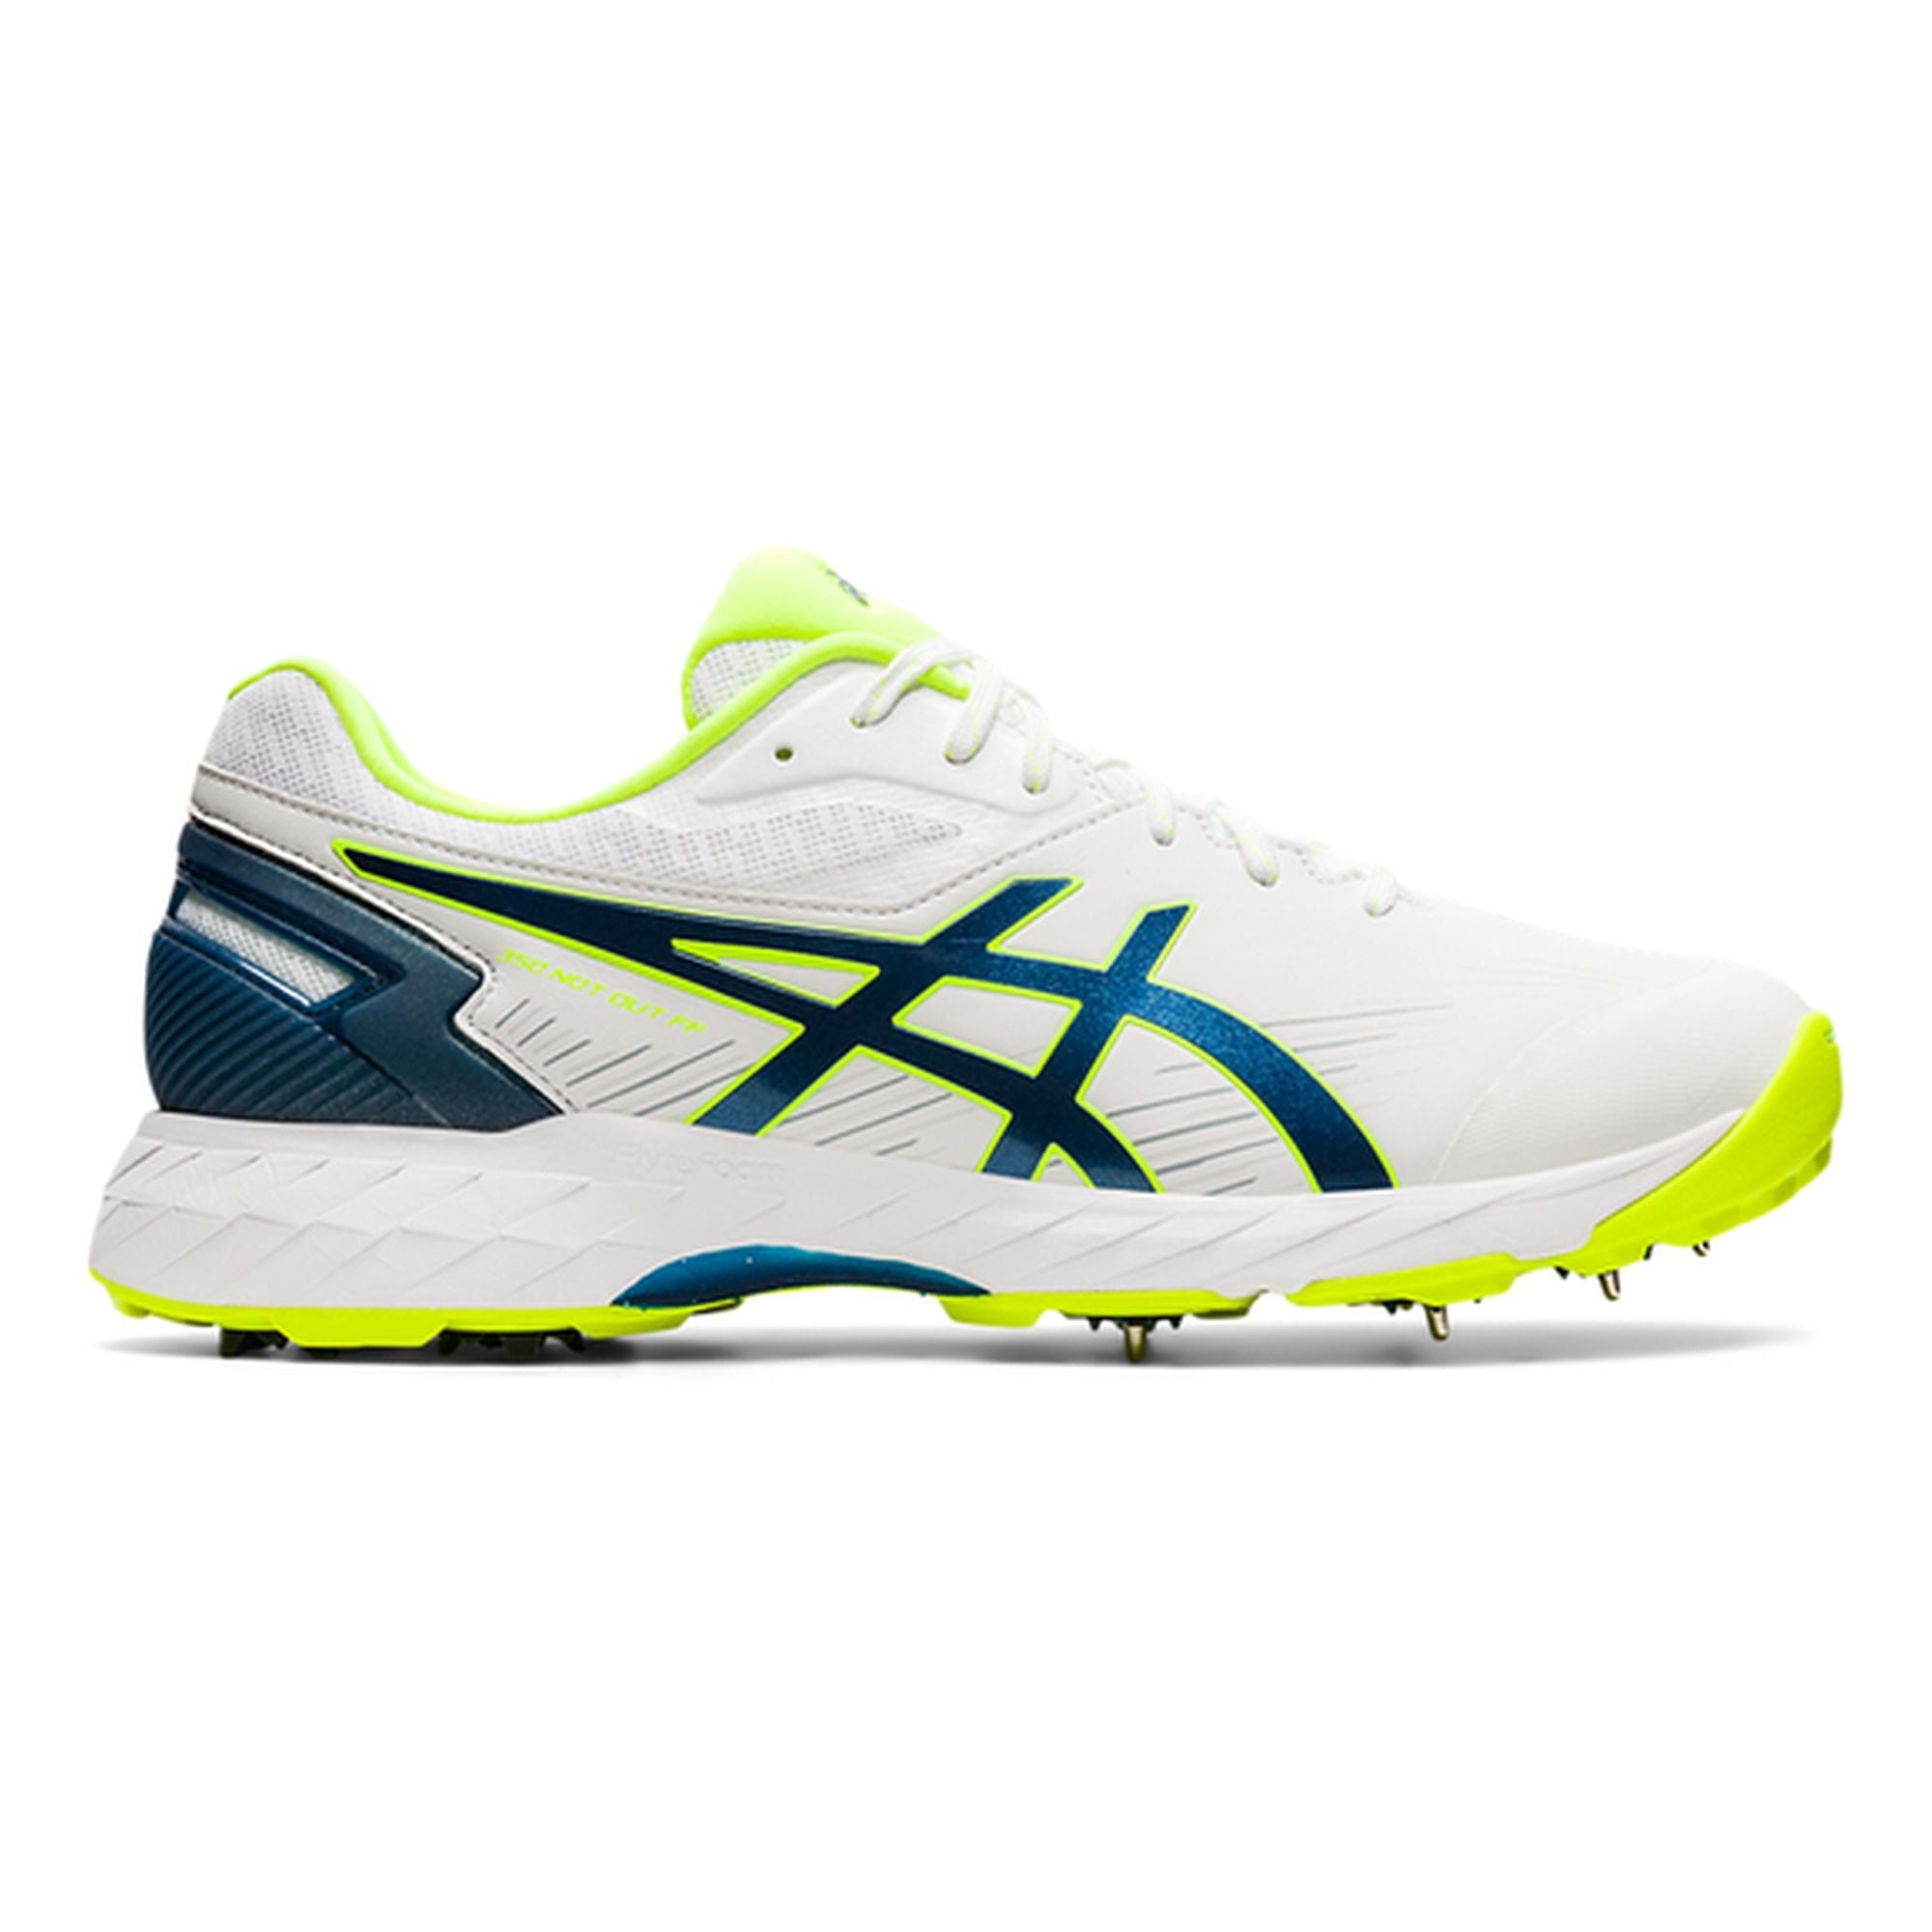 Asics Gel 350 Not Out Cricket Spikes Blue/Yellow - The Cricket Warehouse